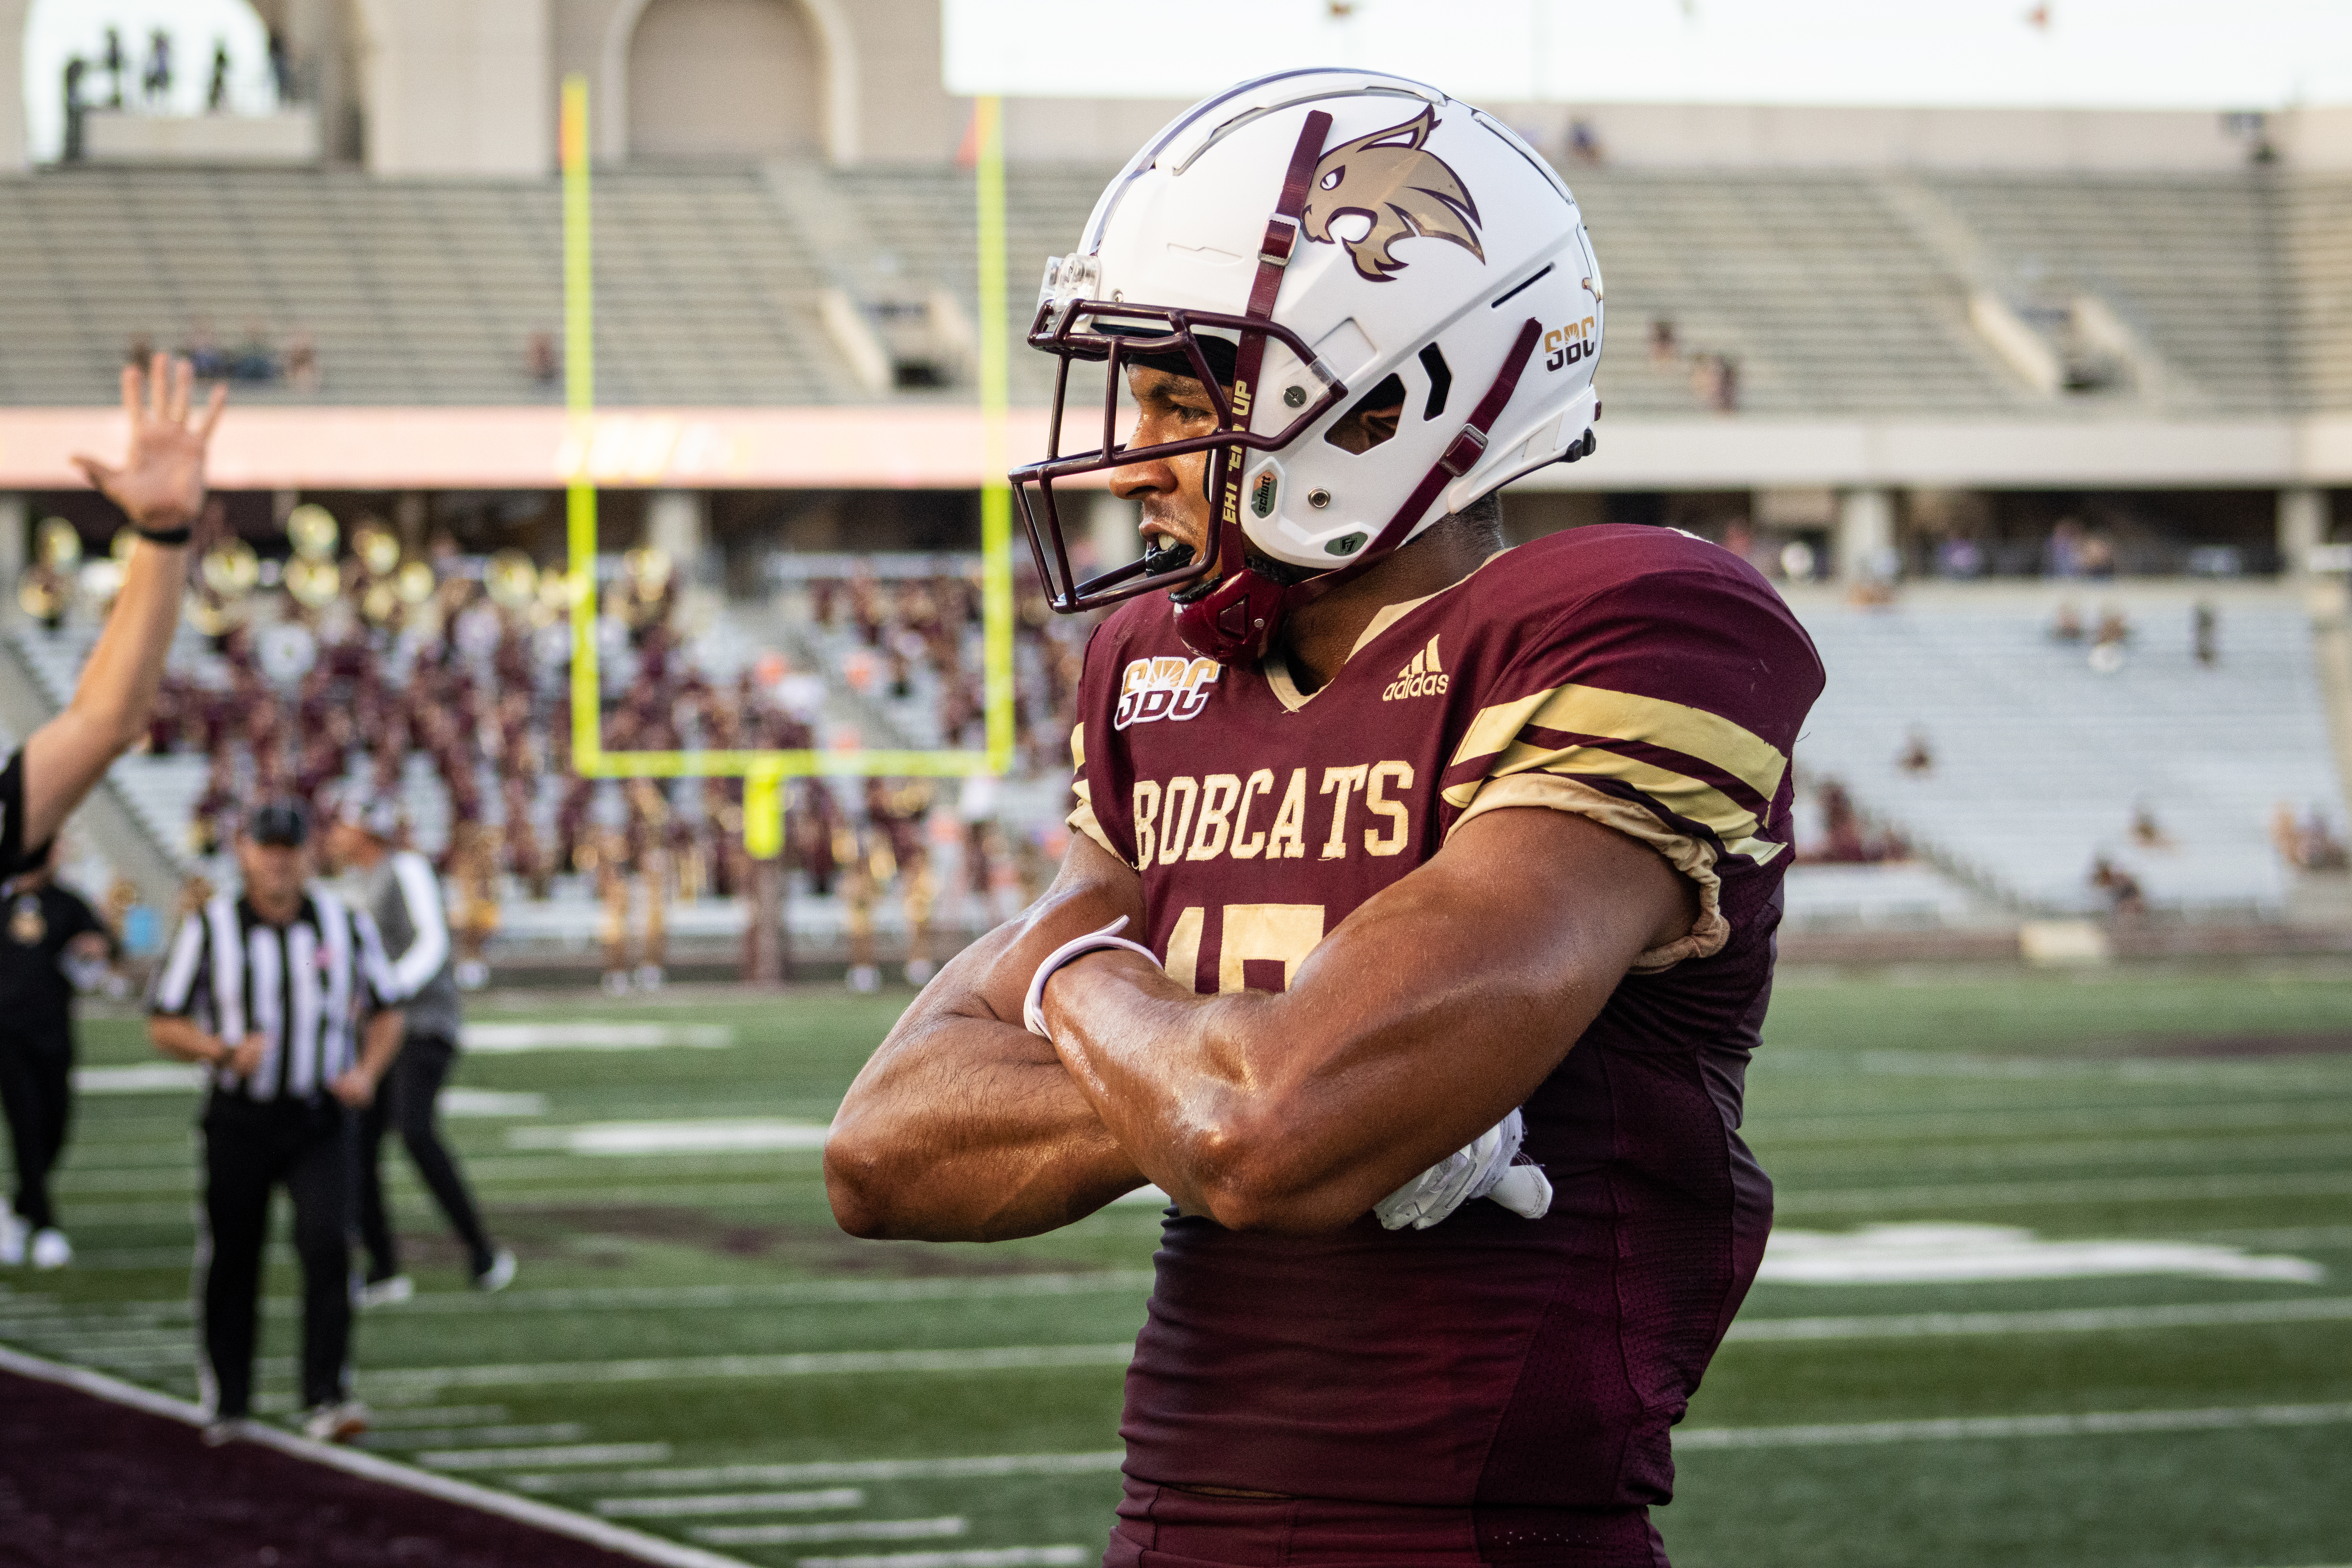 Texas State Wide Receiver celebrating after a touchdown reception mid-game